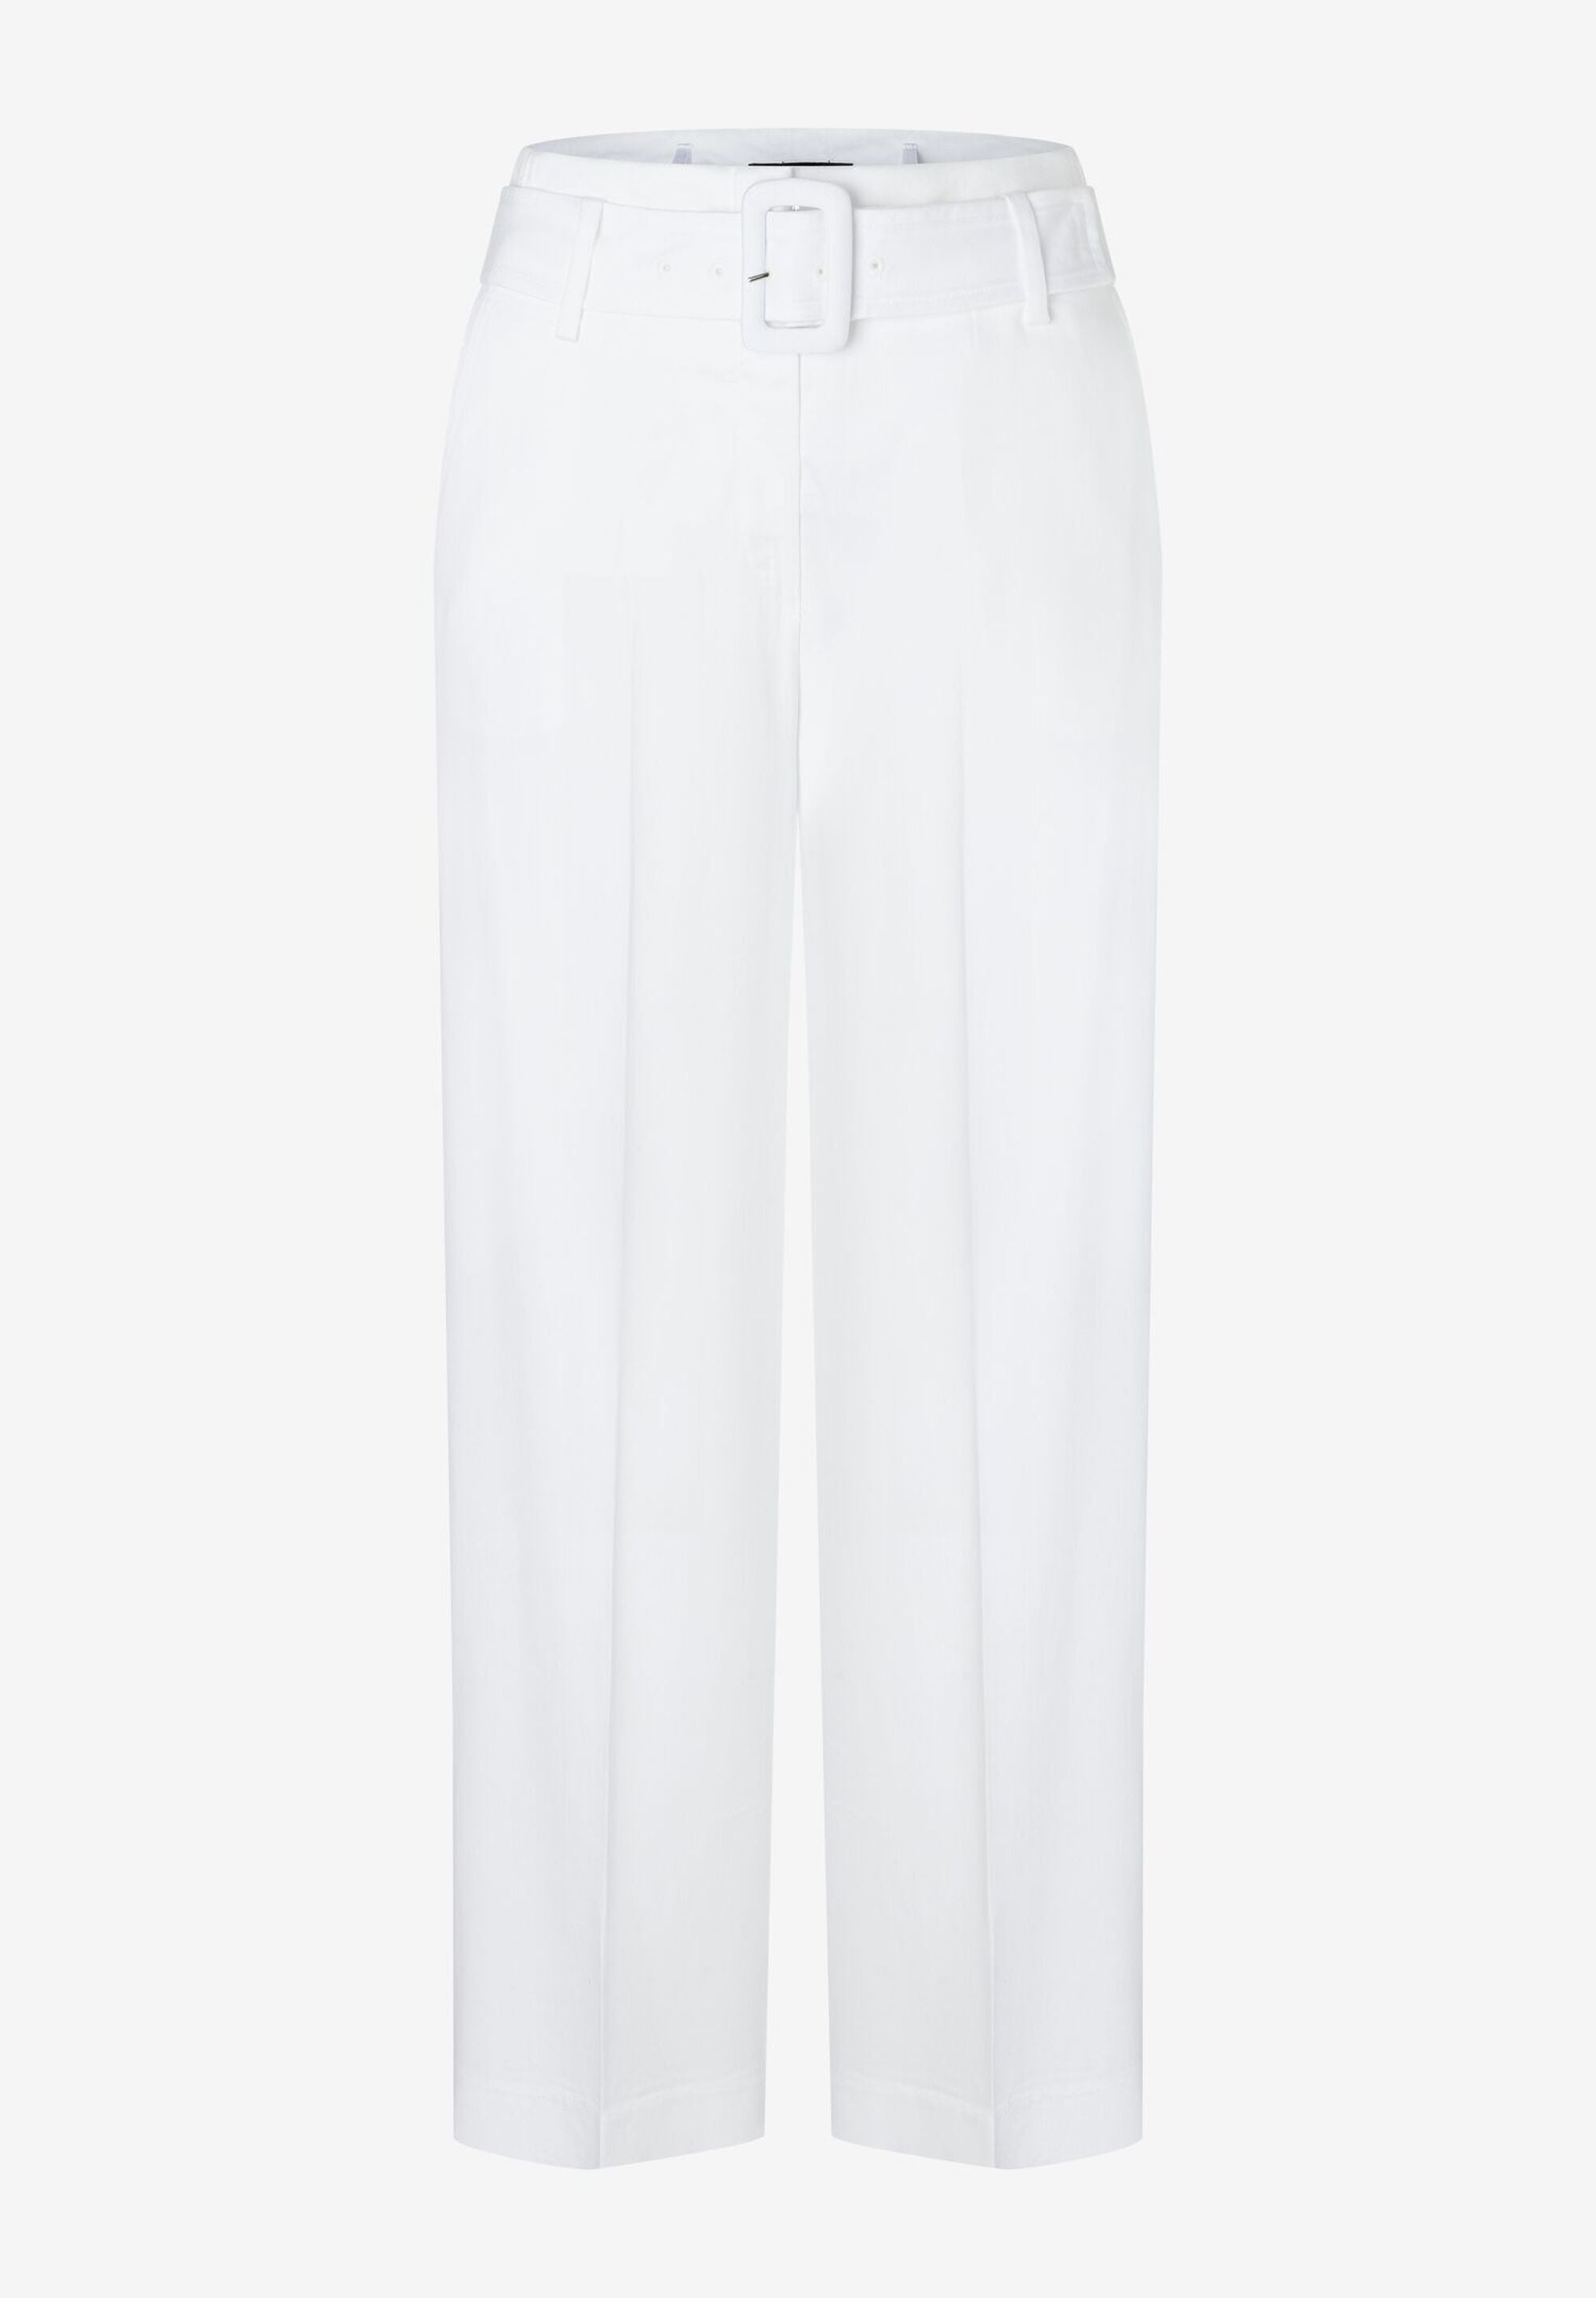 White Cropped Culotte Style Trousers_03